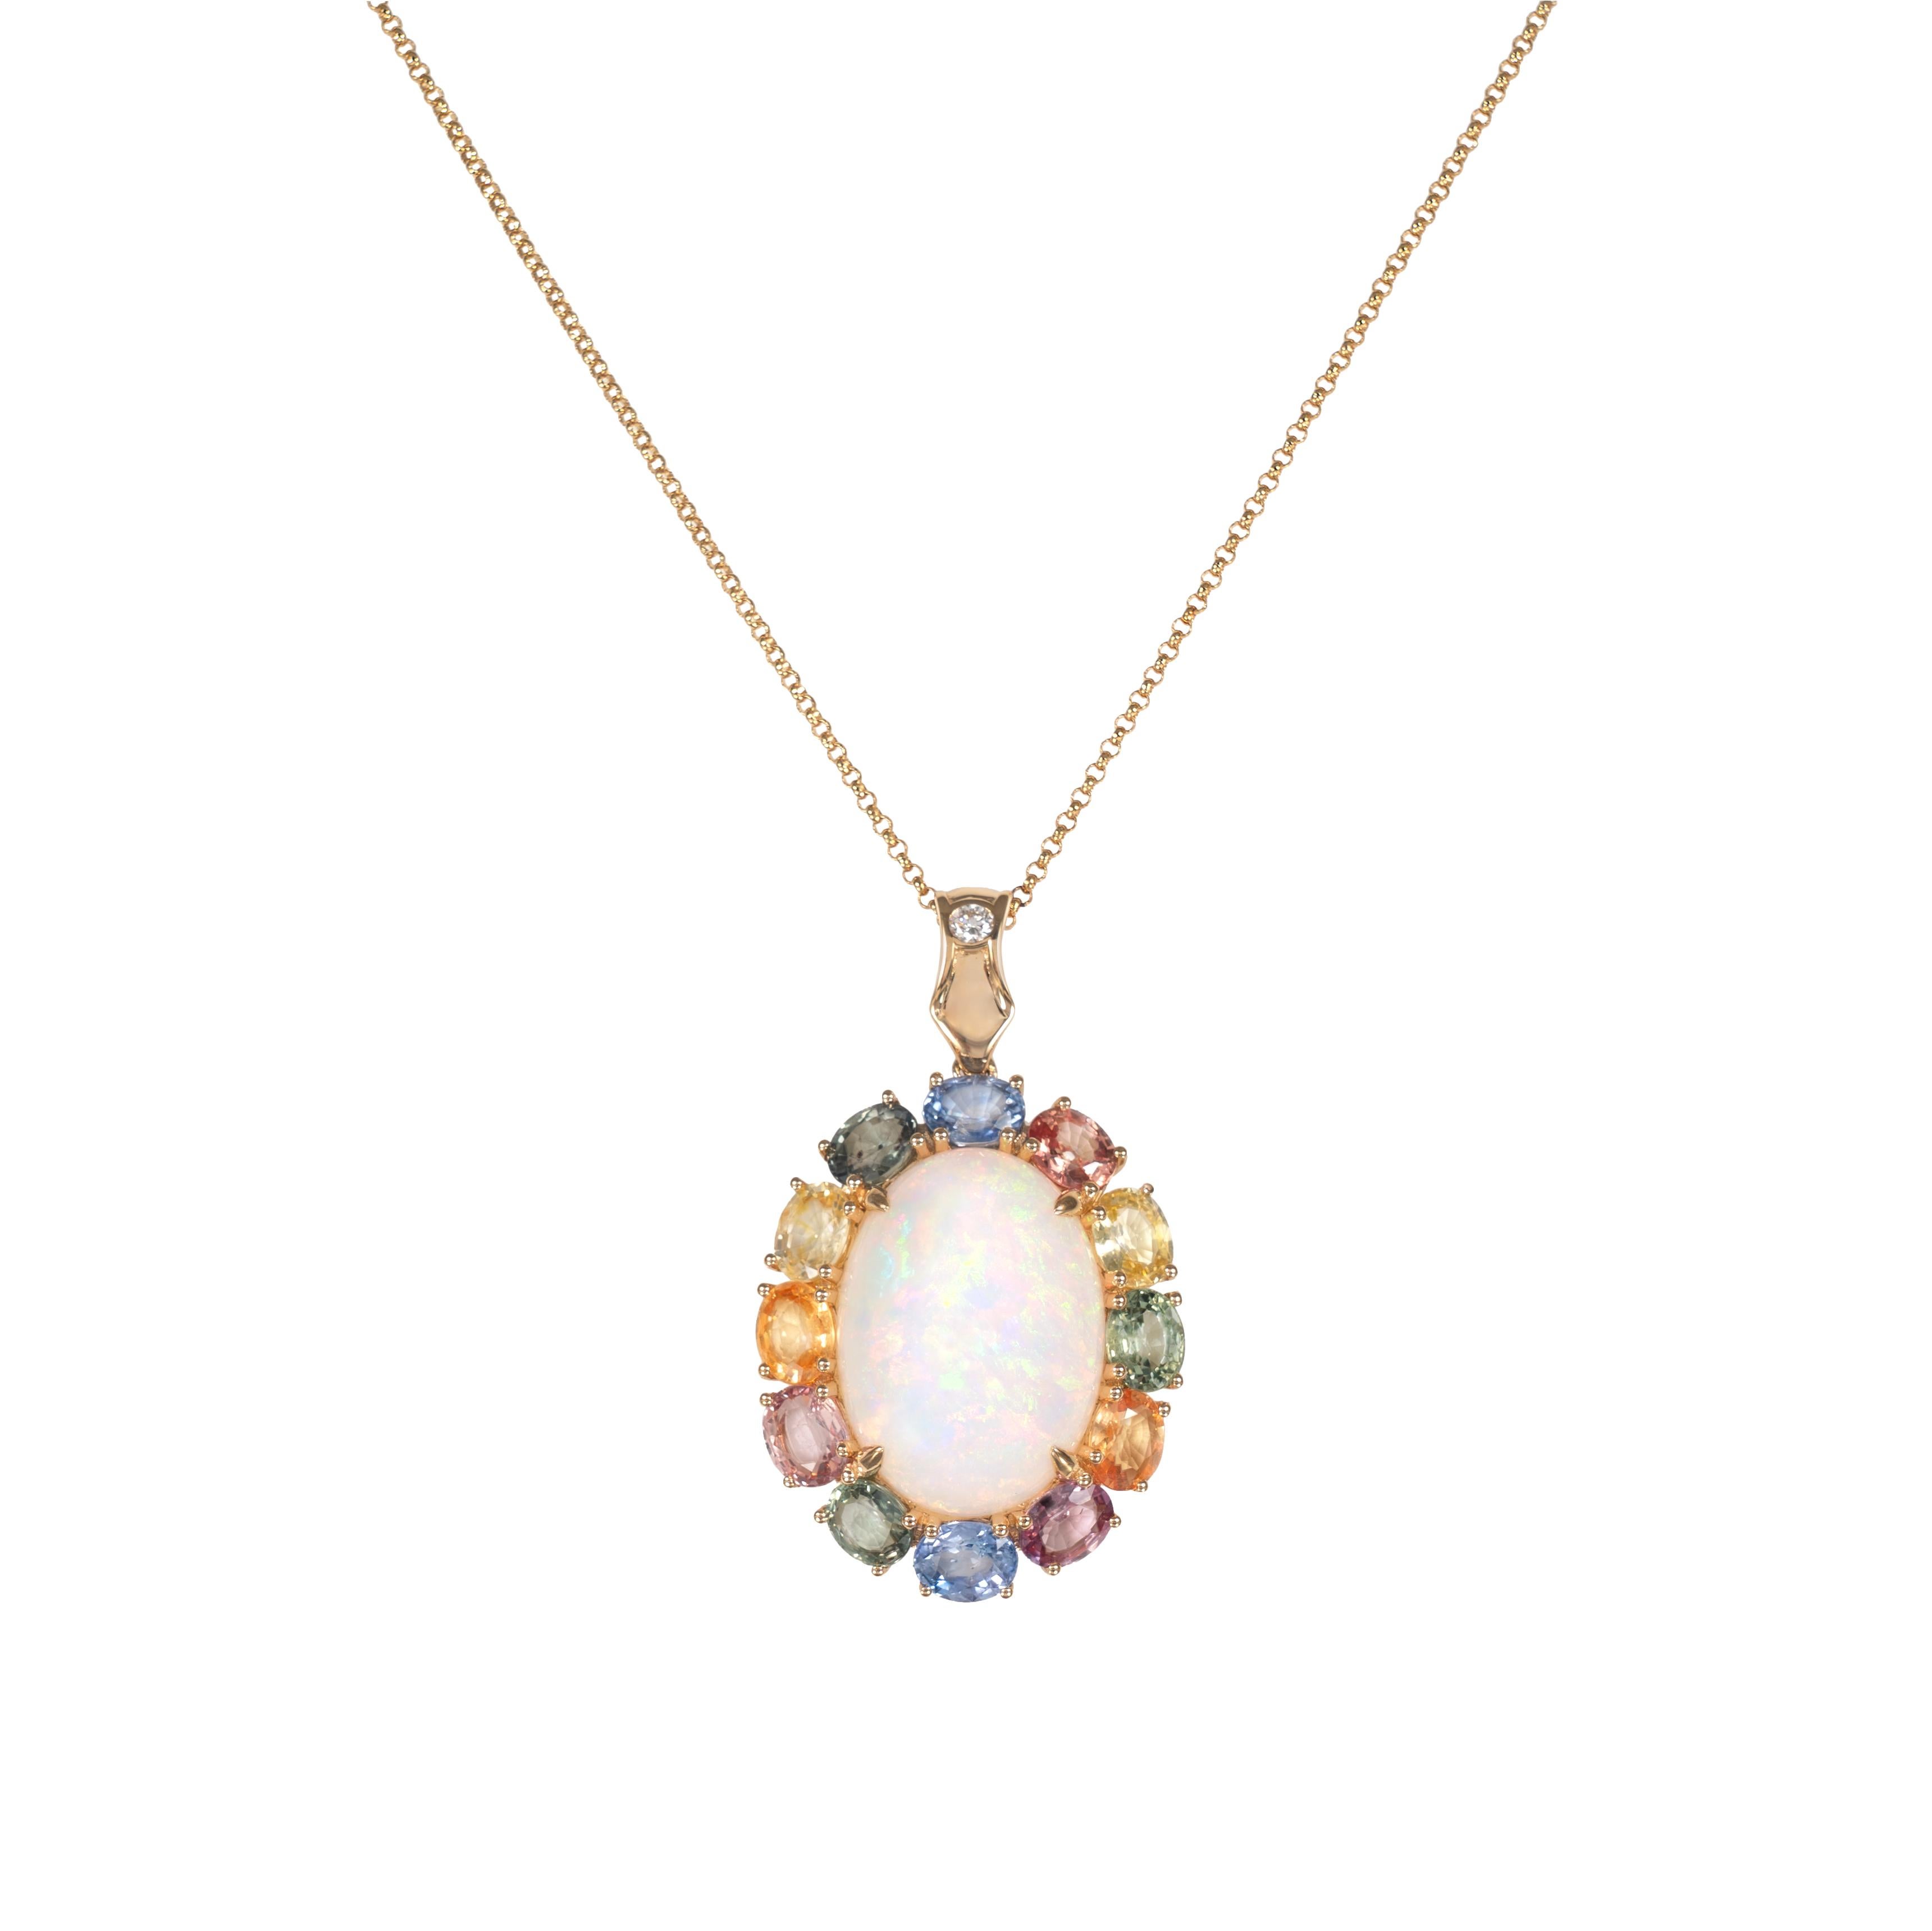 Oval Cut 6.17 Carat Opal Pendant in 18 Karat Yellow Gold with Sapphire and Diamond For Sale